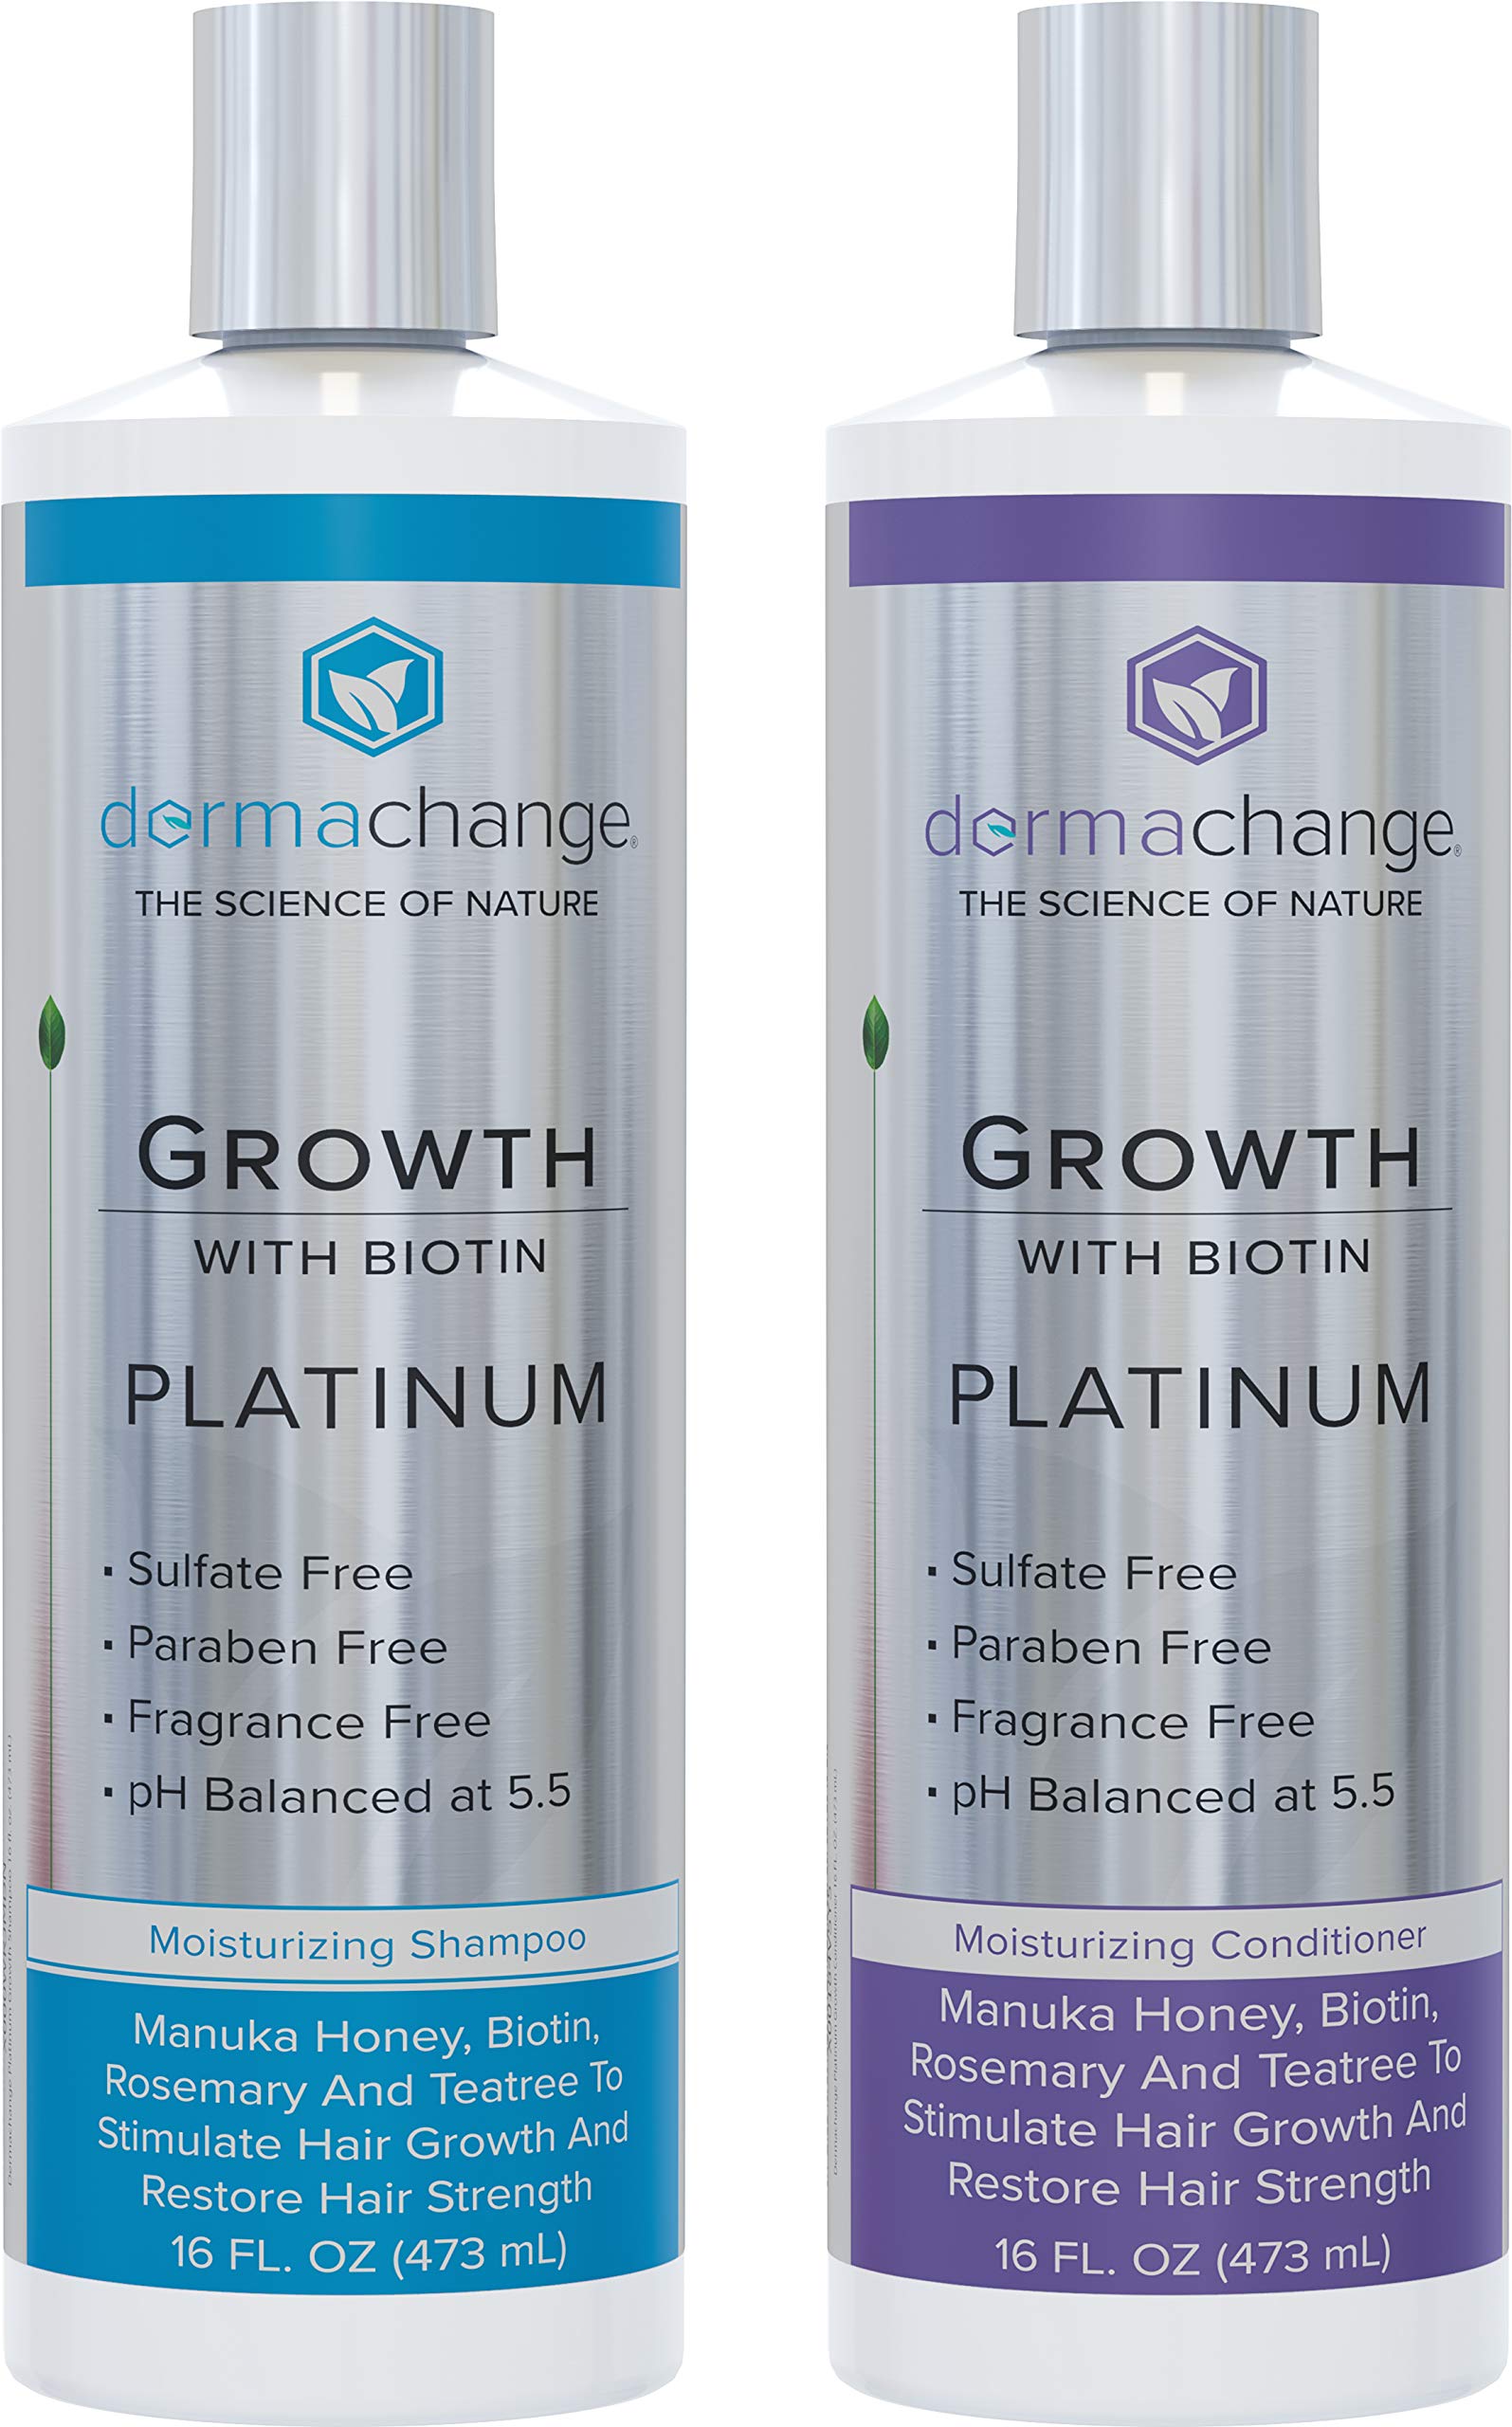 Hair Growth Shampoo and Conditioner Set - Biotin Shampoo for Thinning Hair and Hair Loss - Sulfate Free Shampoo for Color Treated Hair and Deep Conditioner for Dry Damaged Hair - Made in USA (16 oz)